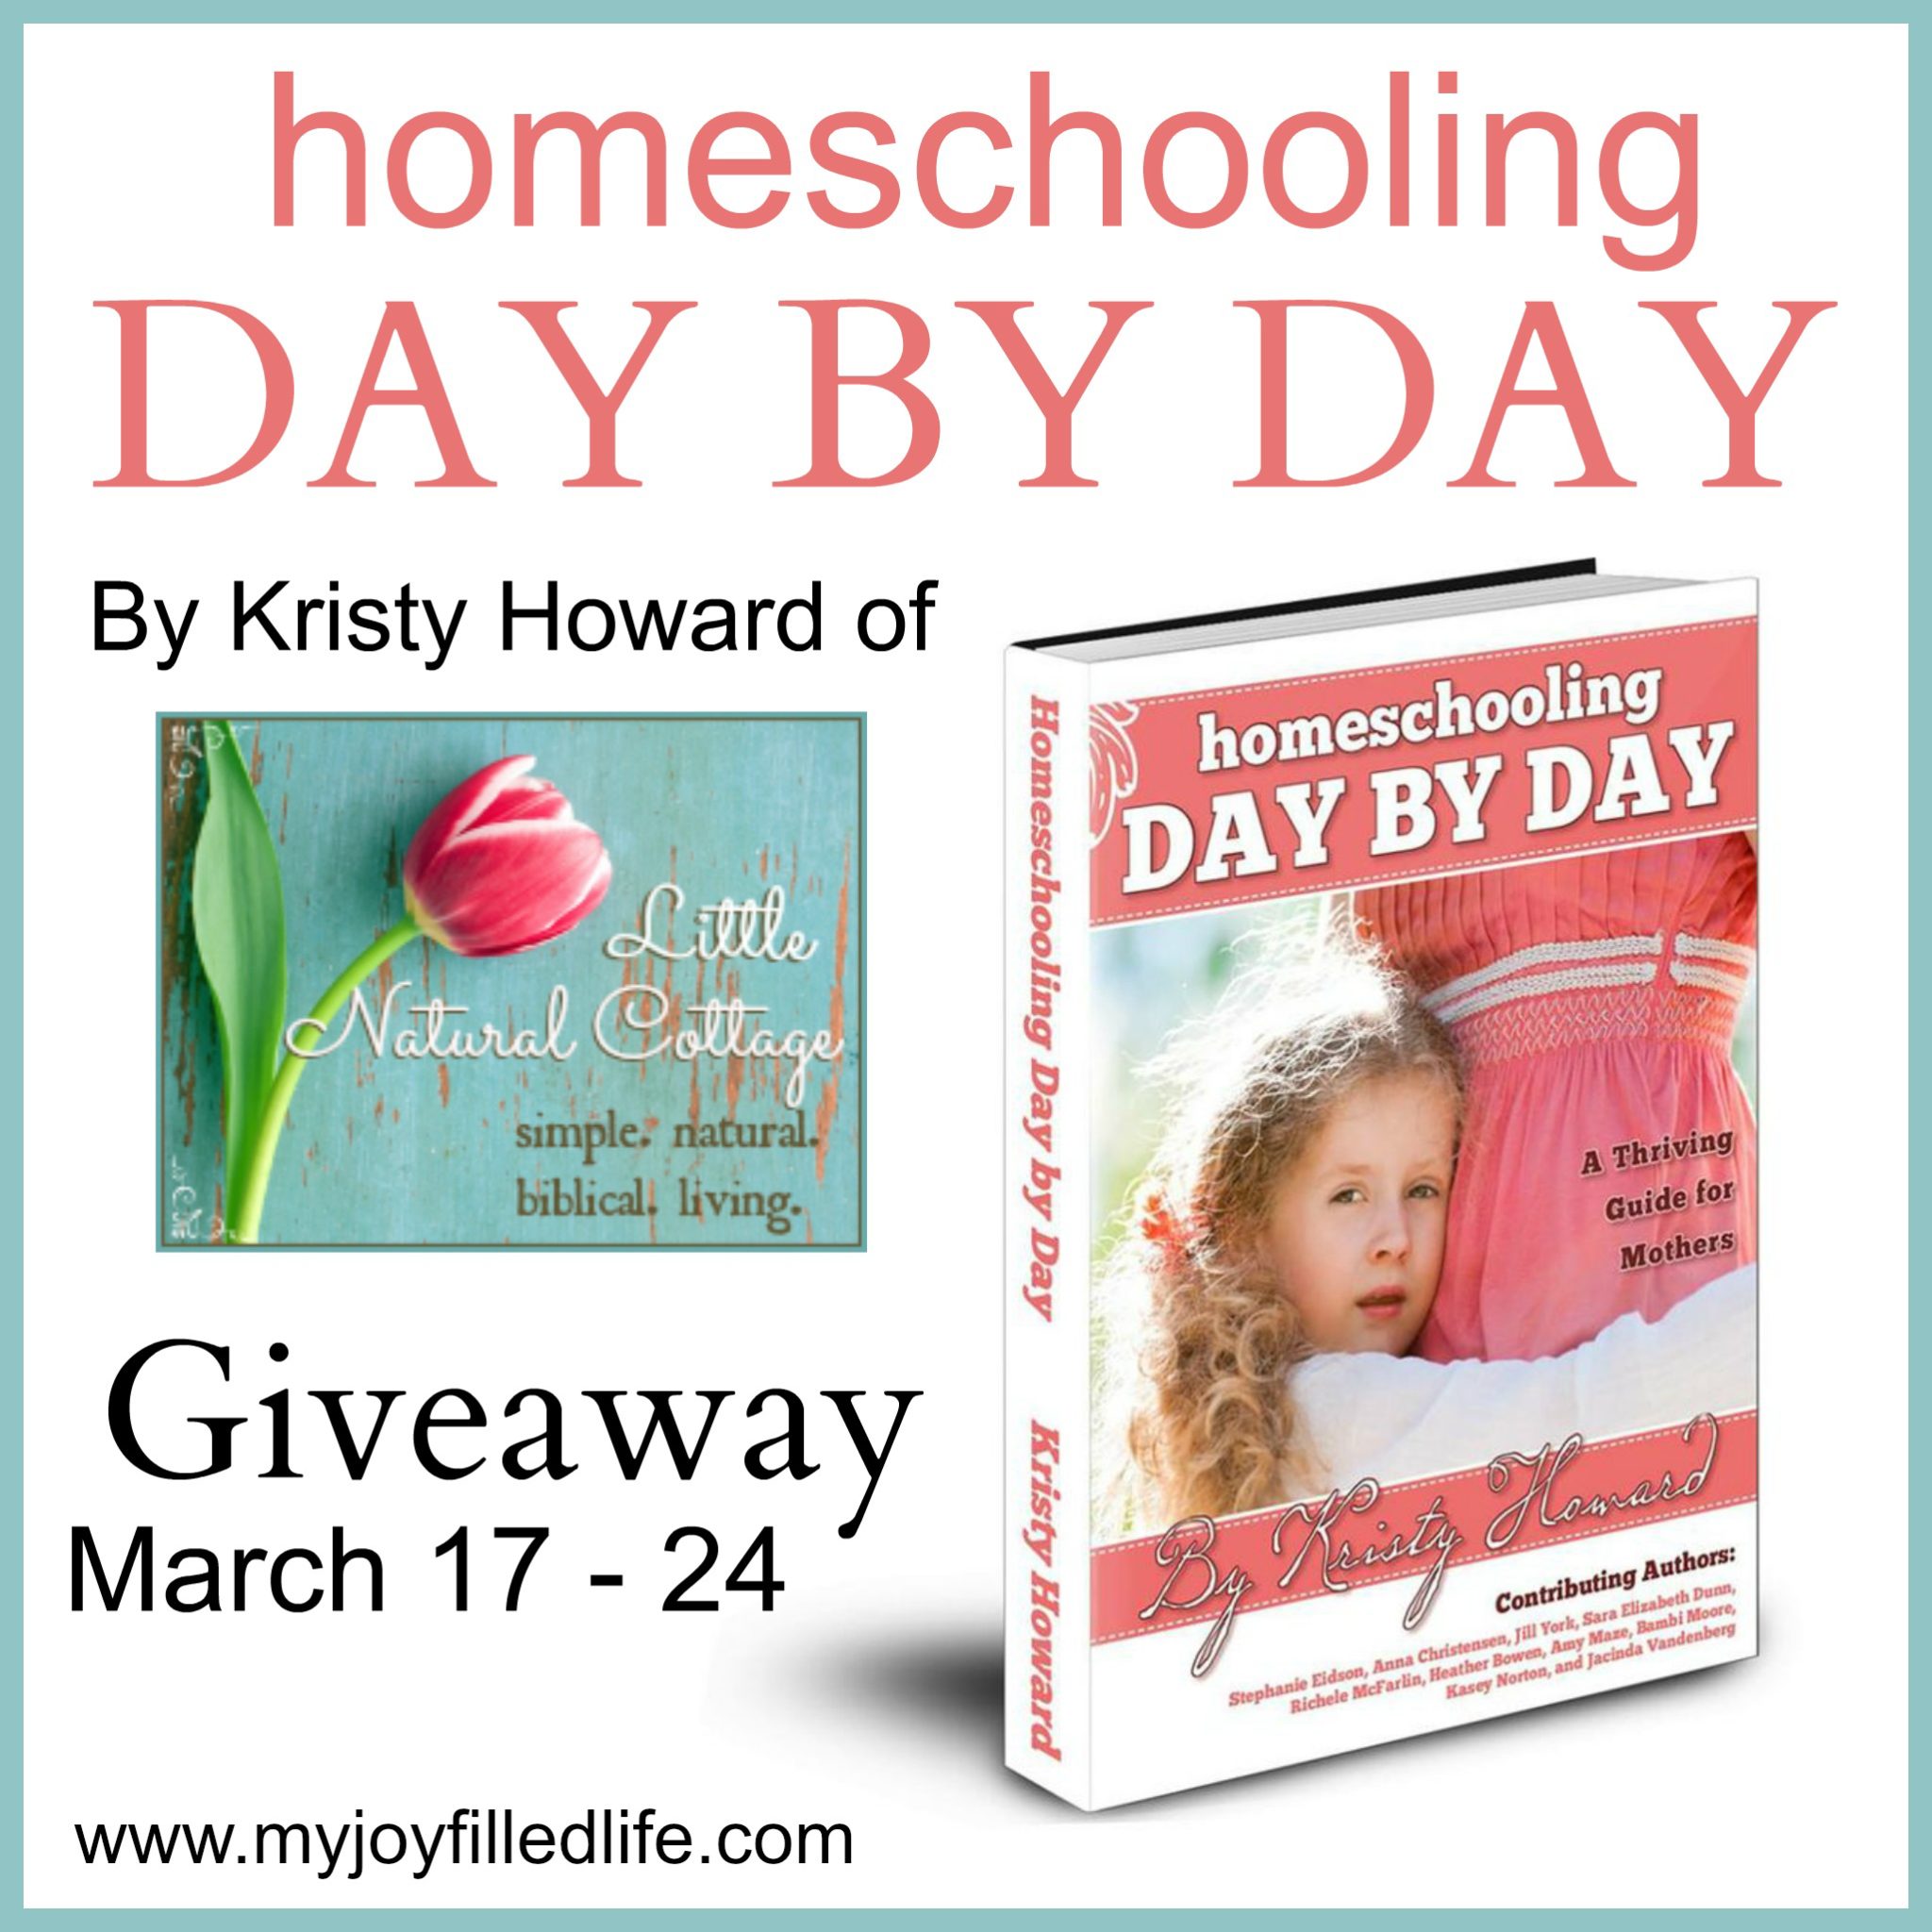 Homeschooling Day by Day Giveaway